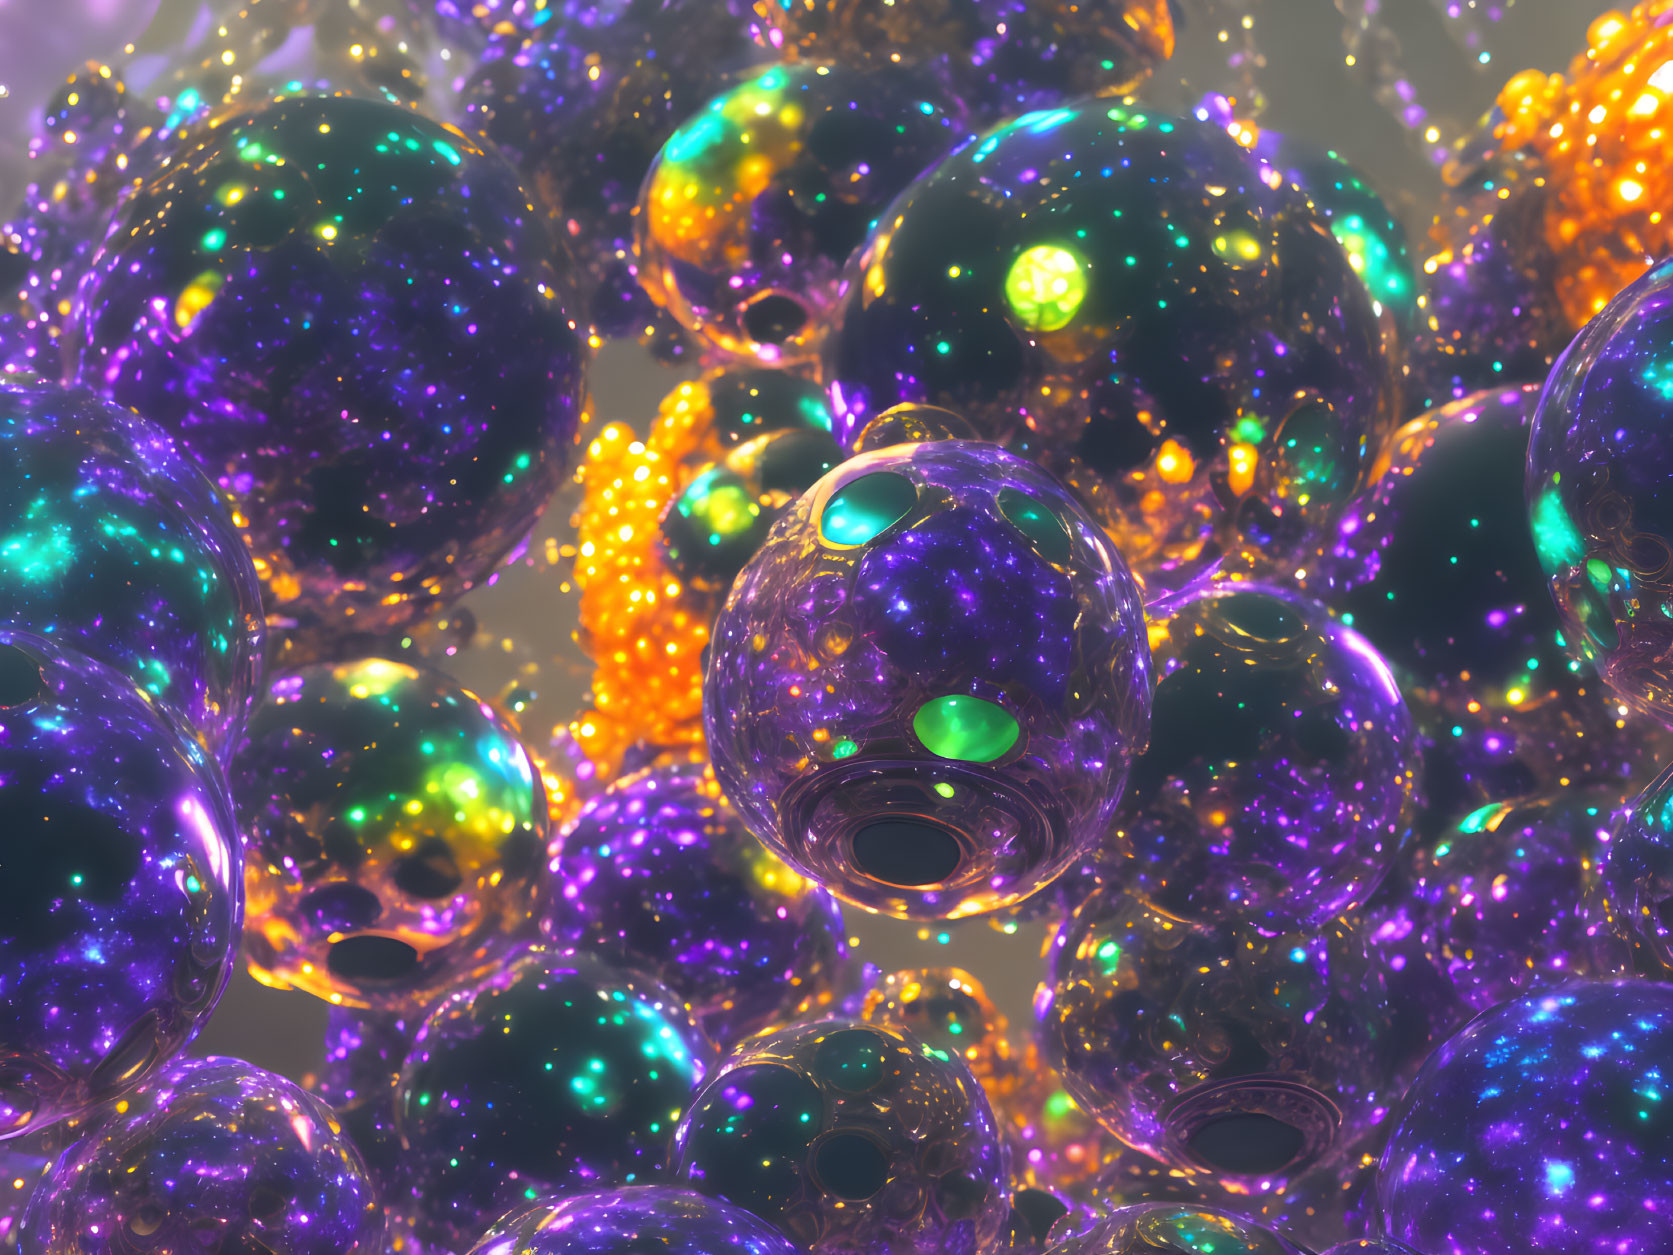 Iridescent Purple and Orange Sparkling Spheres with Intricate Textures